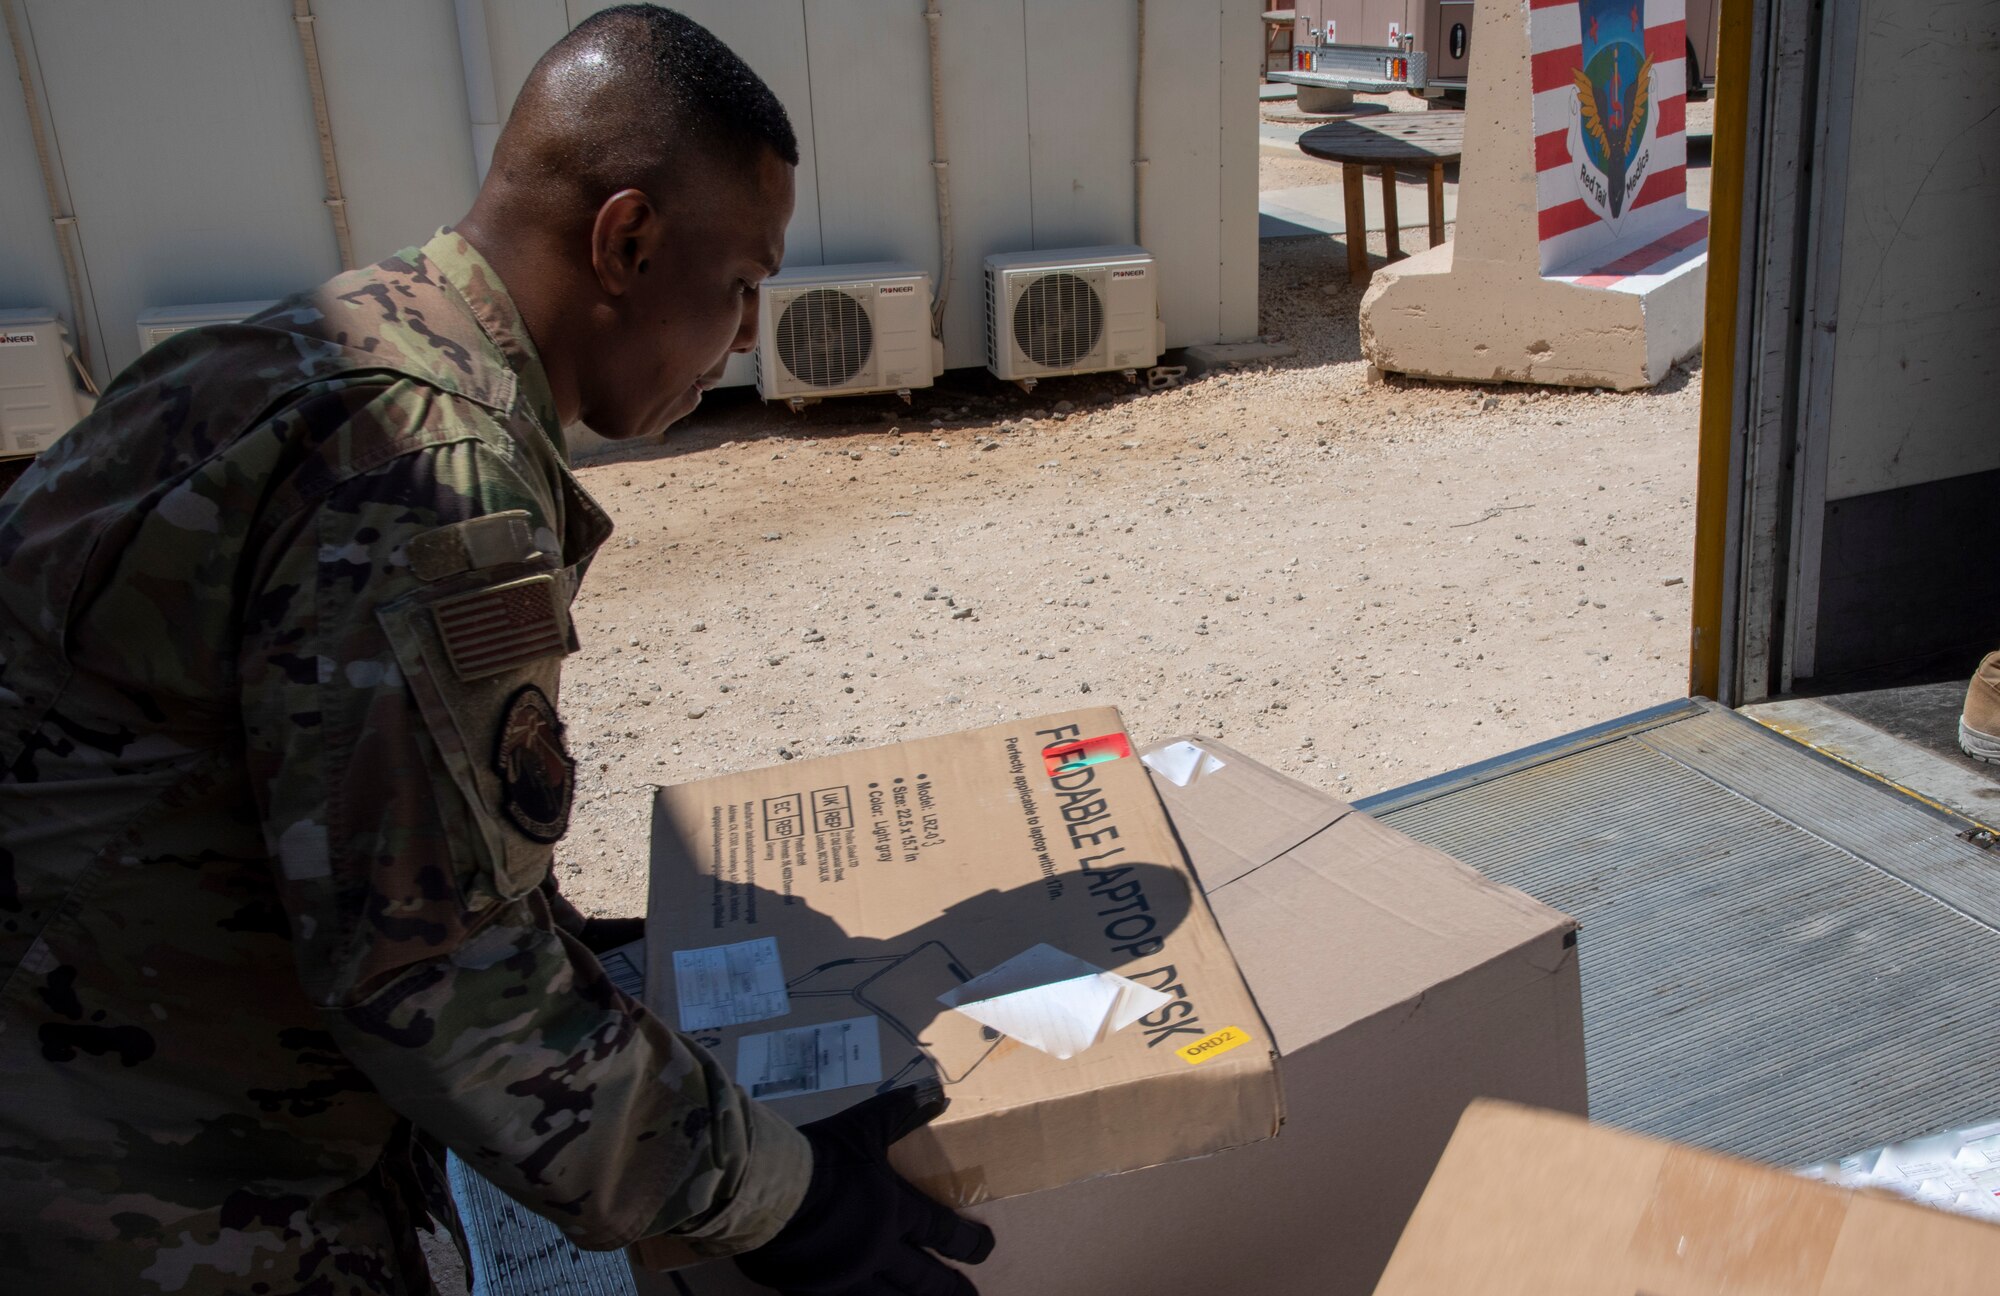 Volunteers and postal workers with the 332d Air Expeditionary Wing process incoming shipments at an undisclosed location in Southwest Asia, August 23, 2022. Each package must be inspected and sorted to make sure it gets to the right person. (U.S. Air Force photo by: Tech. Sgt. Jim Bentley)